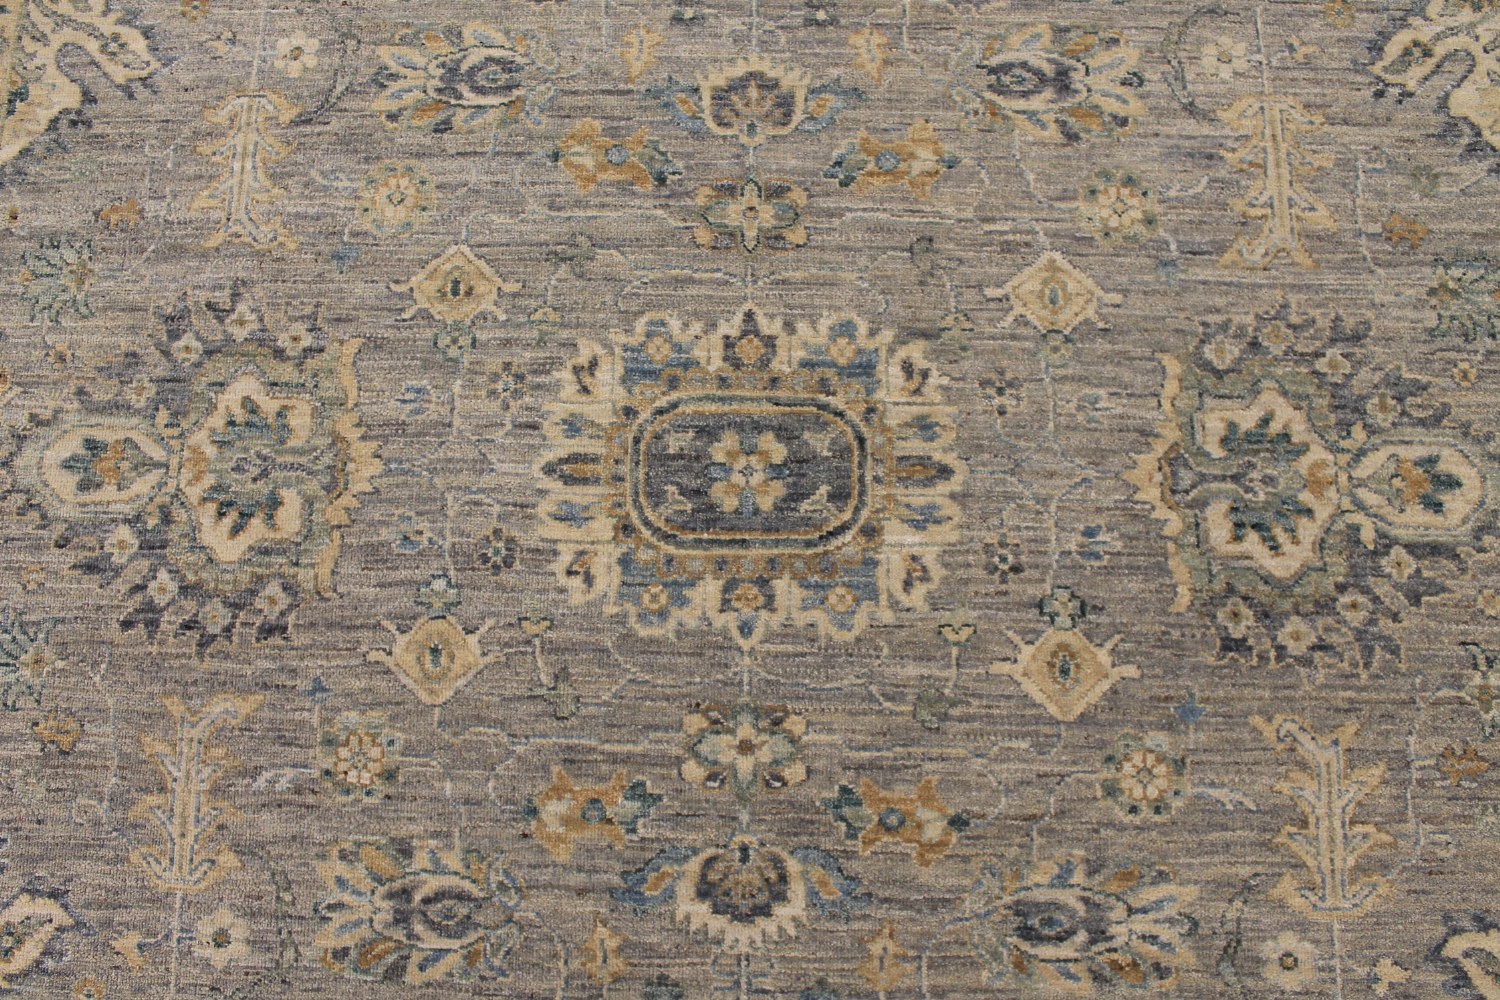 8x10 Traditional Hand Knotted Wool Area Rug - MR028605